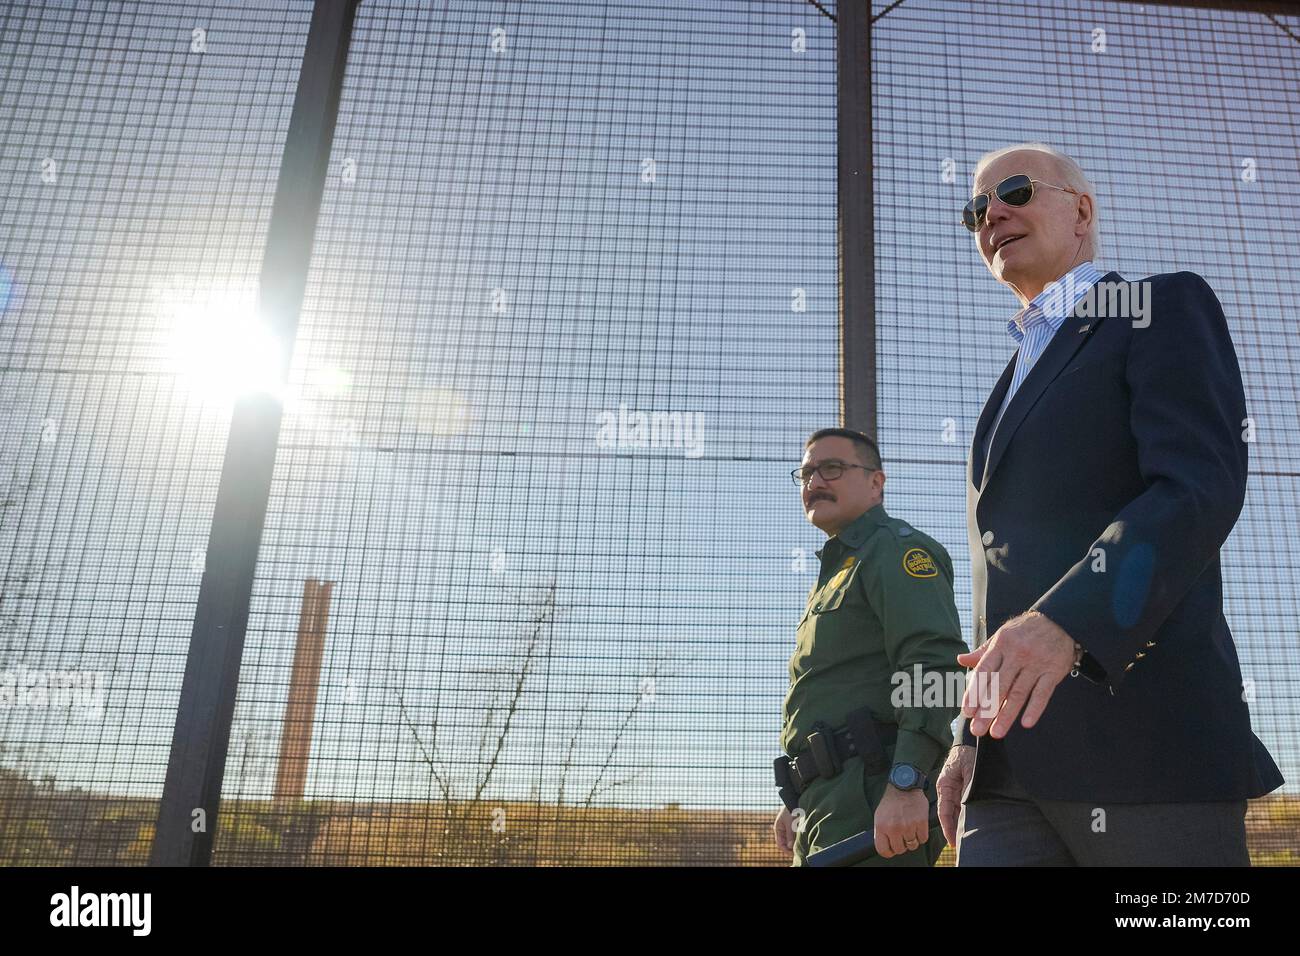 El Paso, United States of America. 08 January, 2023. U.S President Joe Biden, center, walks with Custom and Border Patrol officers during a visit to the border wall along the Rio Grande, January 8, 2023 in El Paso, Texas. Biden is in El Paso to view the southern border where migration is at a record high. Credit: Adam Schultz/White House Photo/Alamy Live News Stock Photo